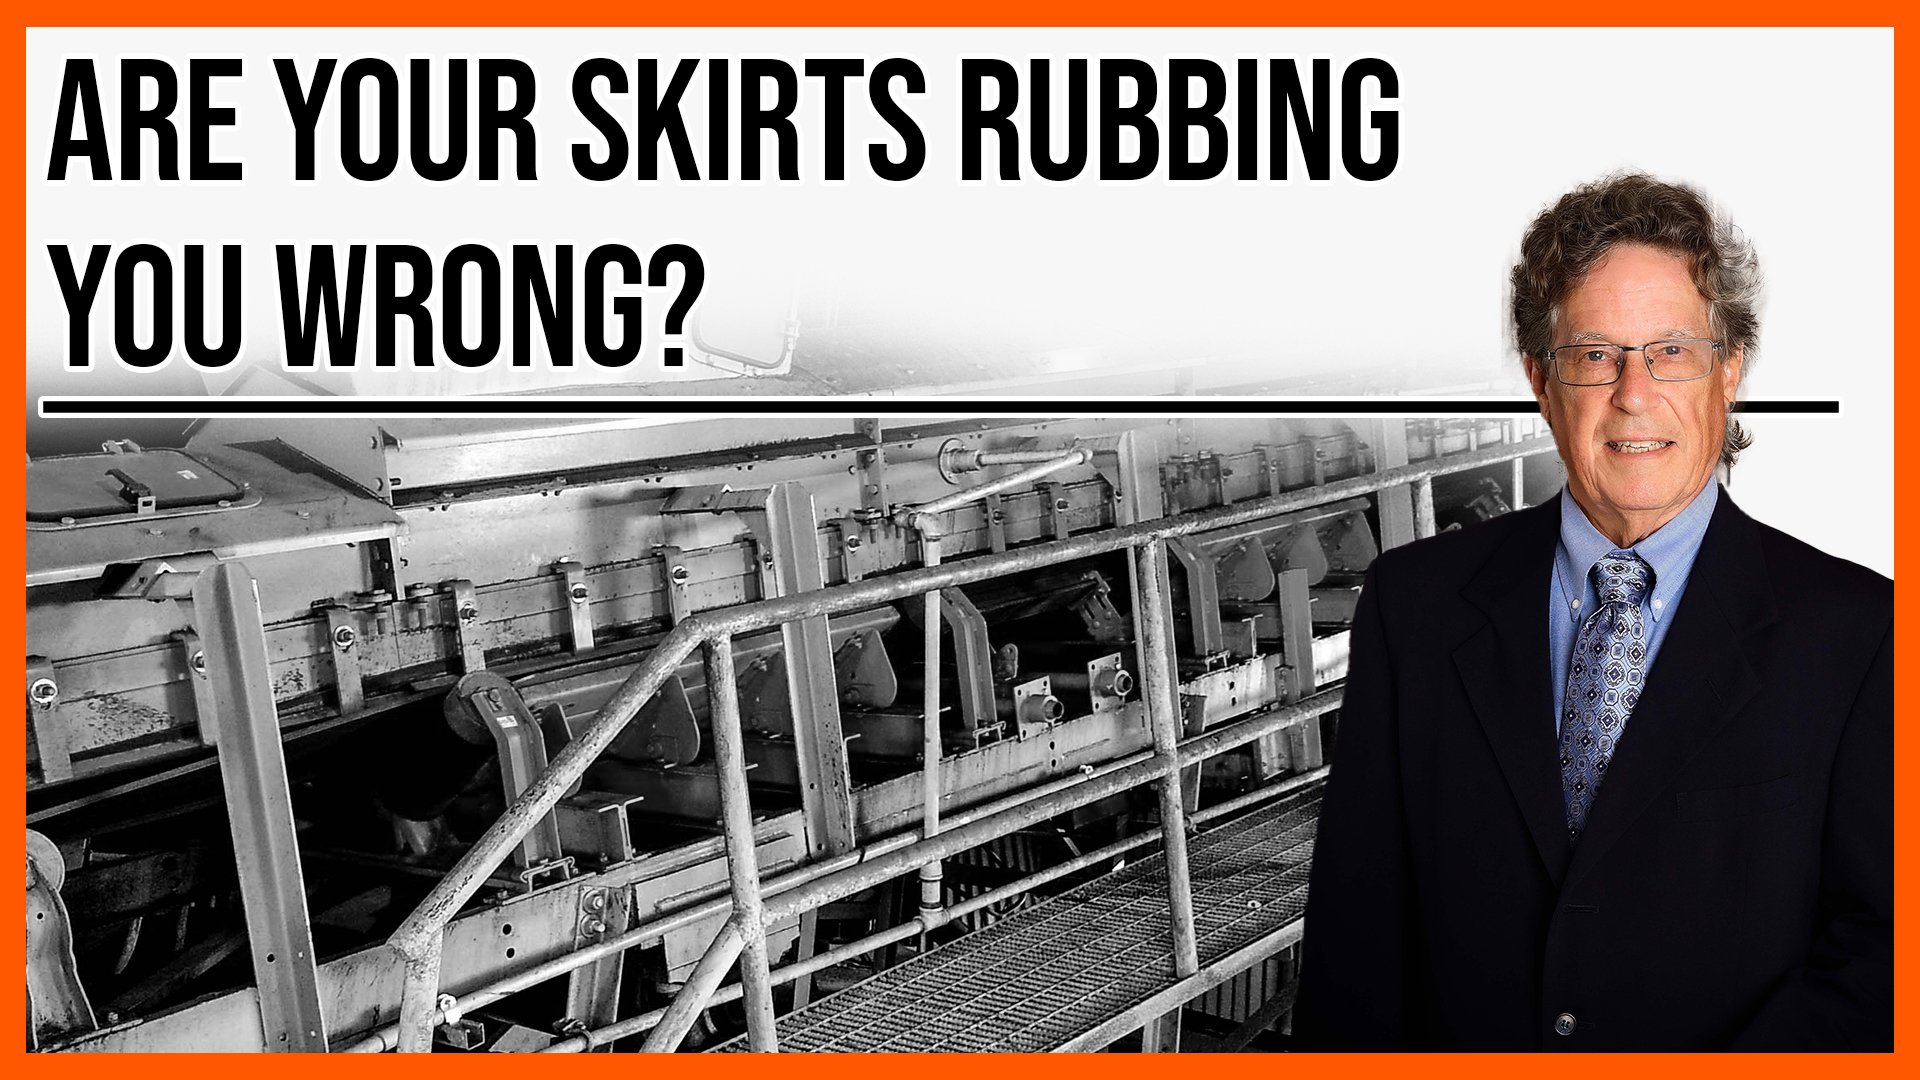 Are Your Skirts Rubbing You Wrong?